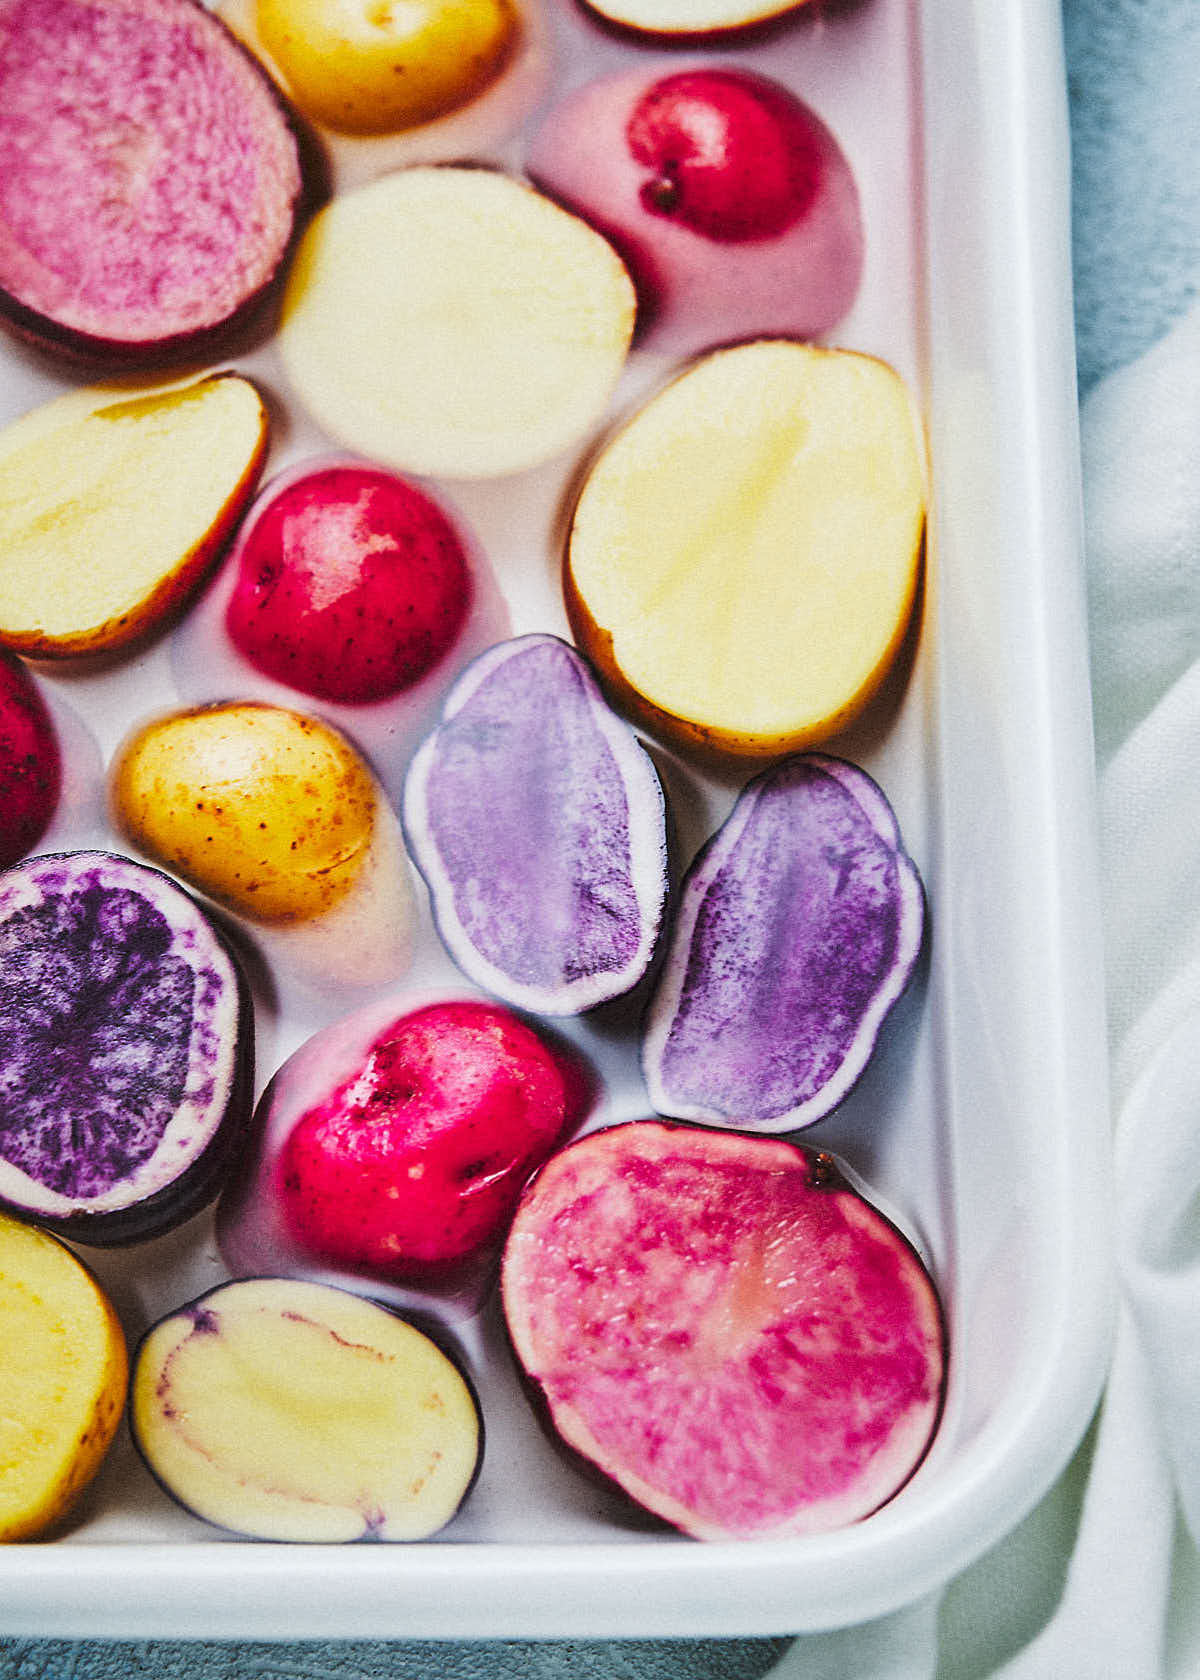 Red, yellow and purple potatoes soaking in a pan of water